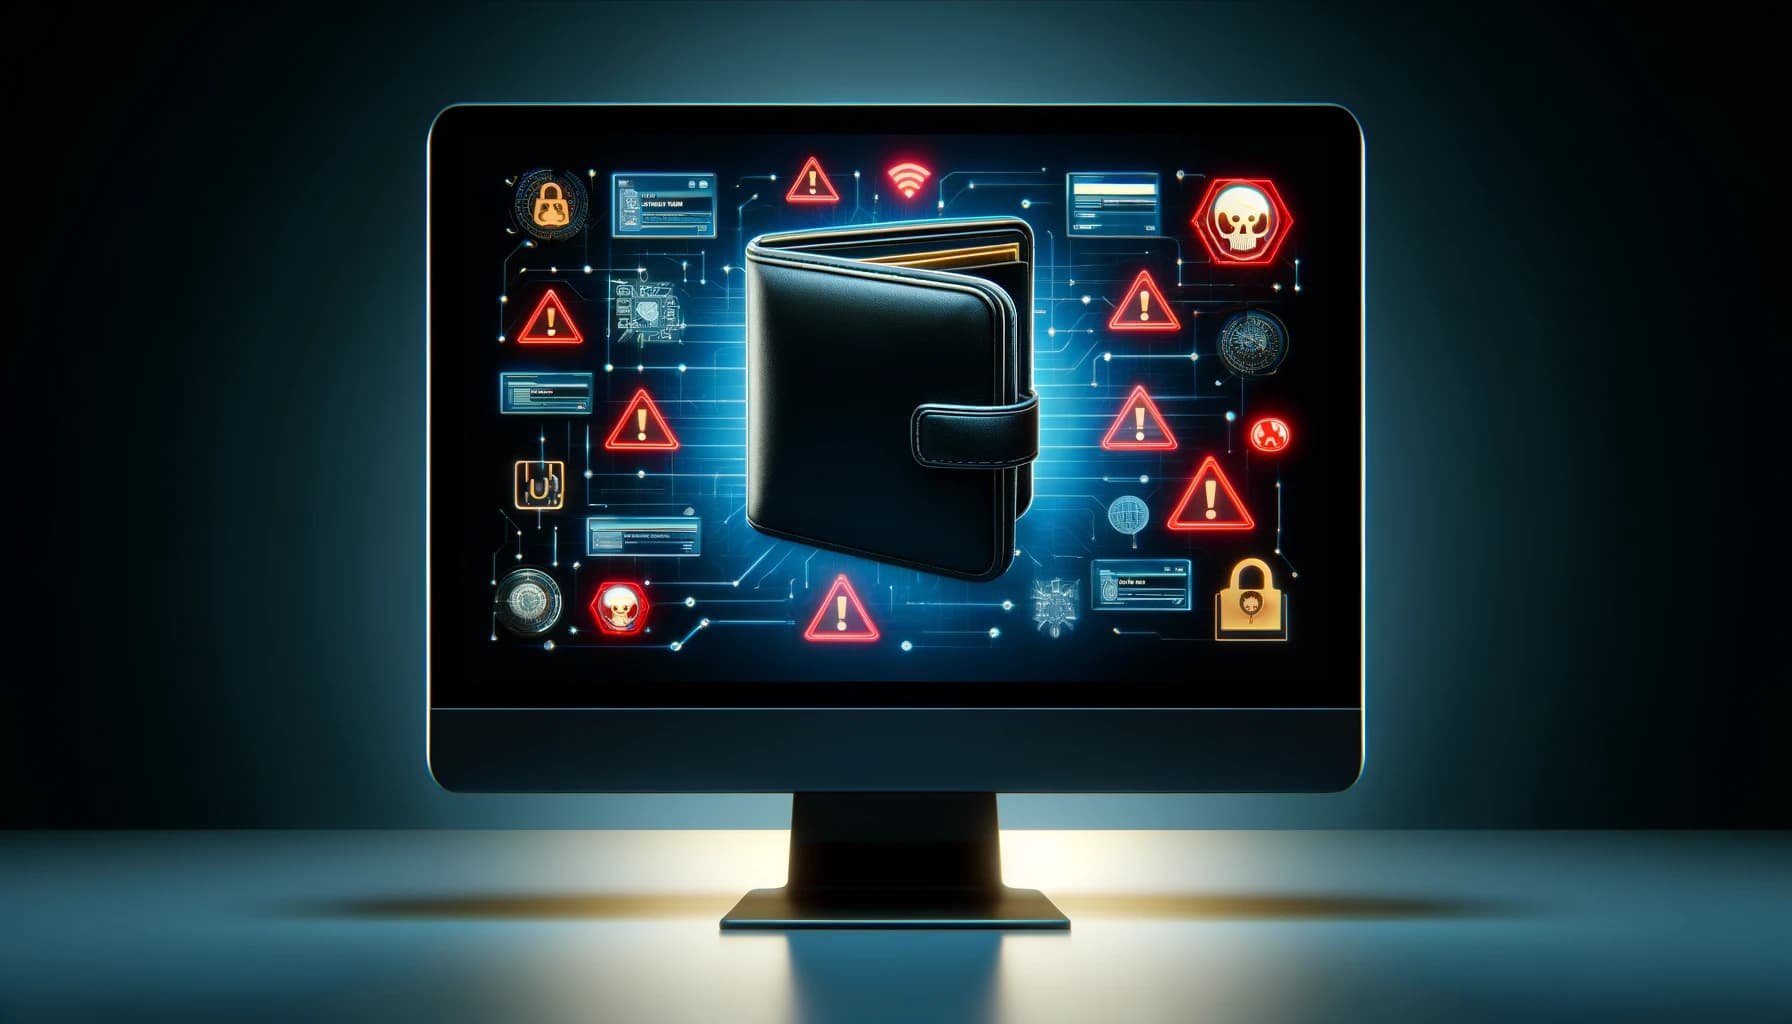 Bucket Technologies image showing a large computer monitor with a bitcoin wallet displayed and surrounded by padlock and caution icons.